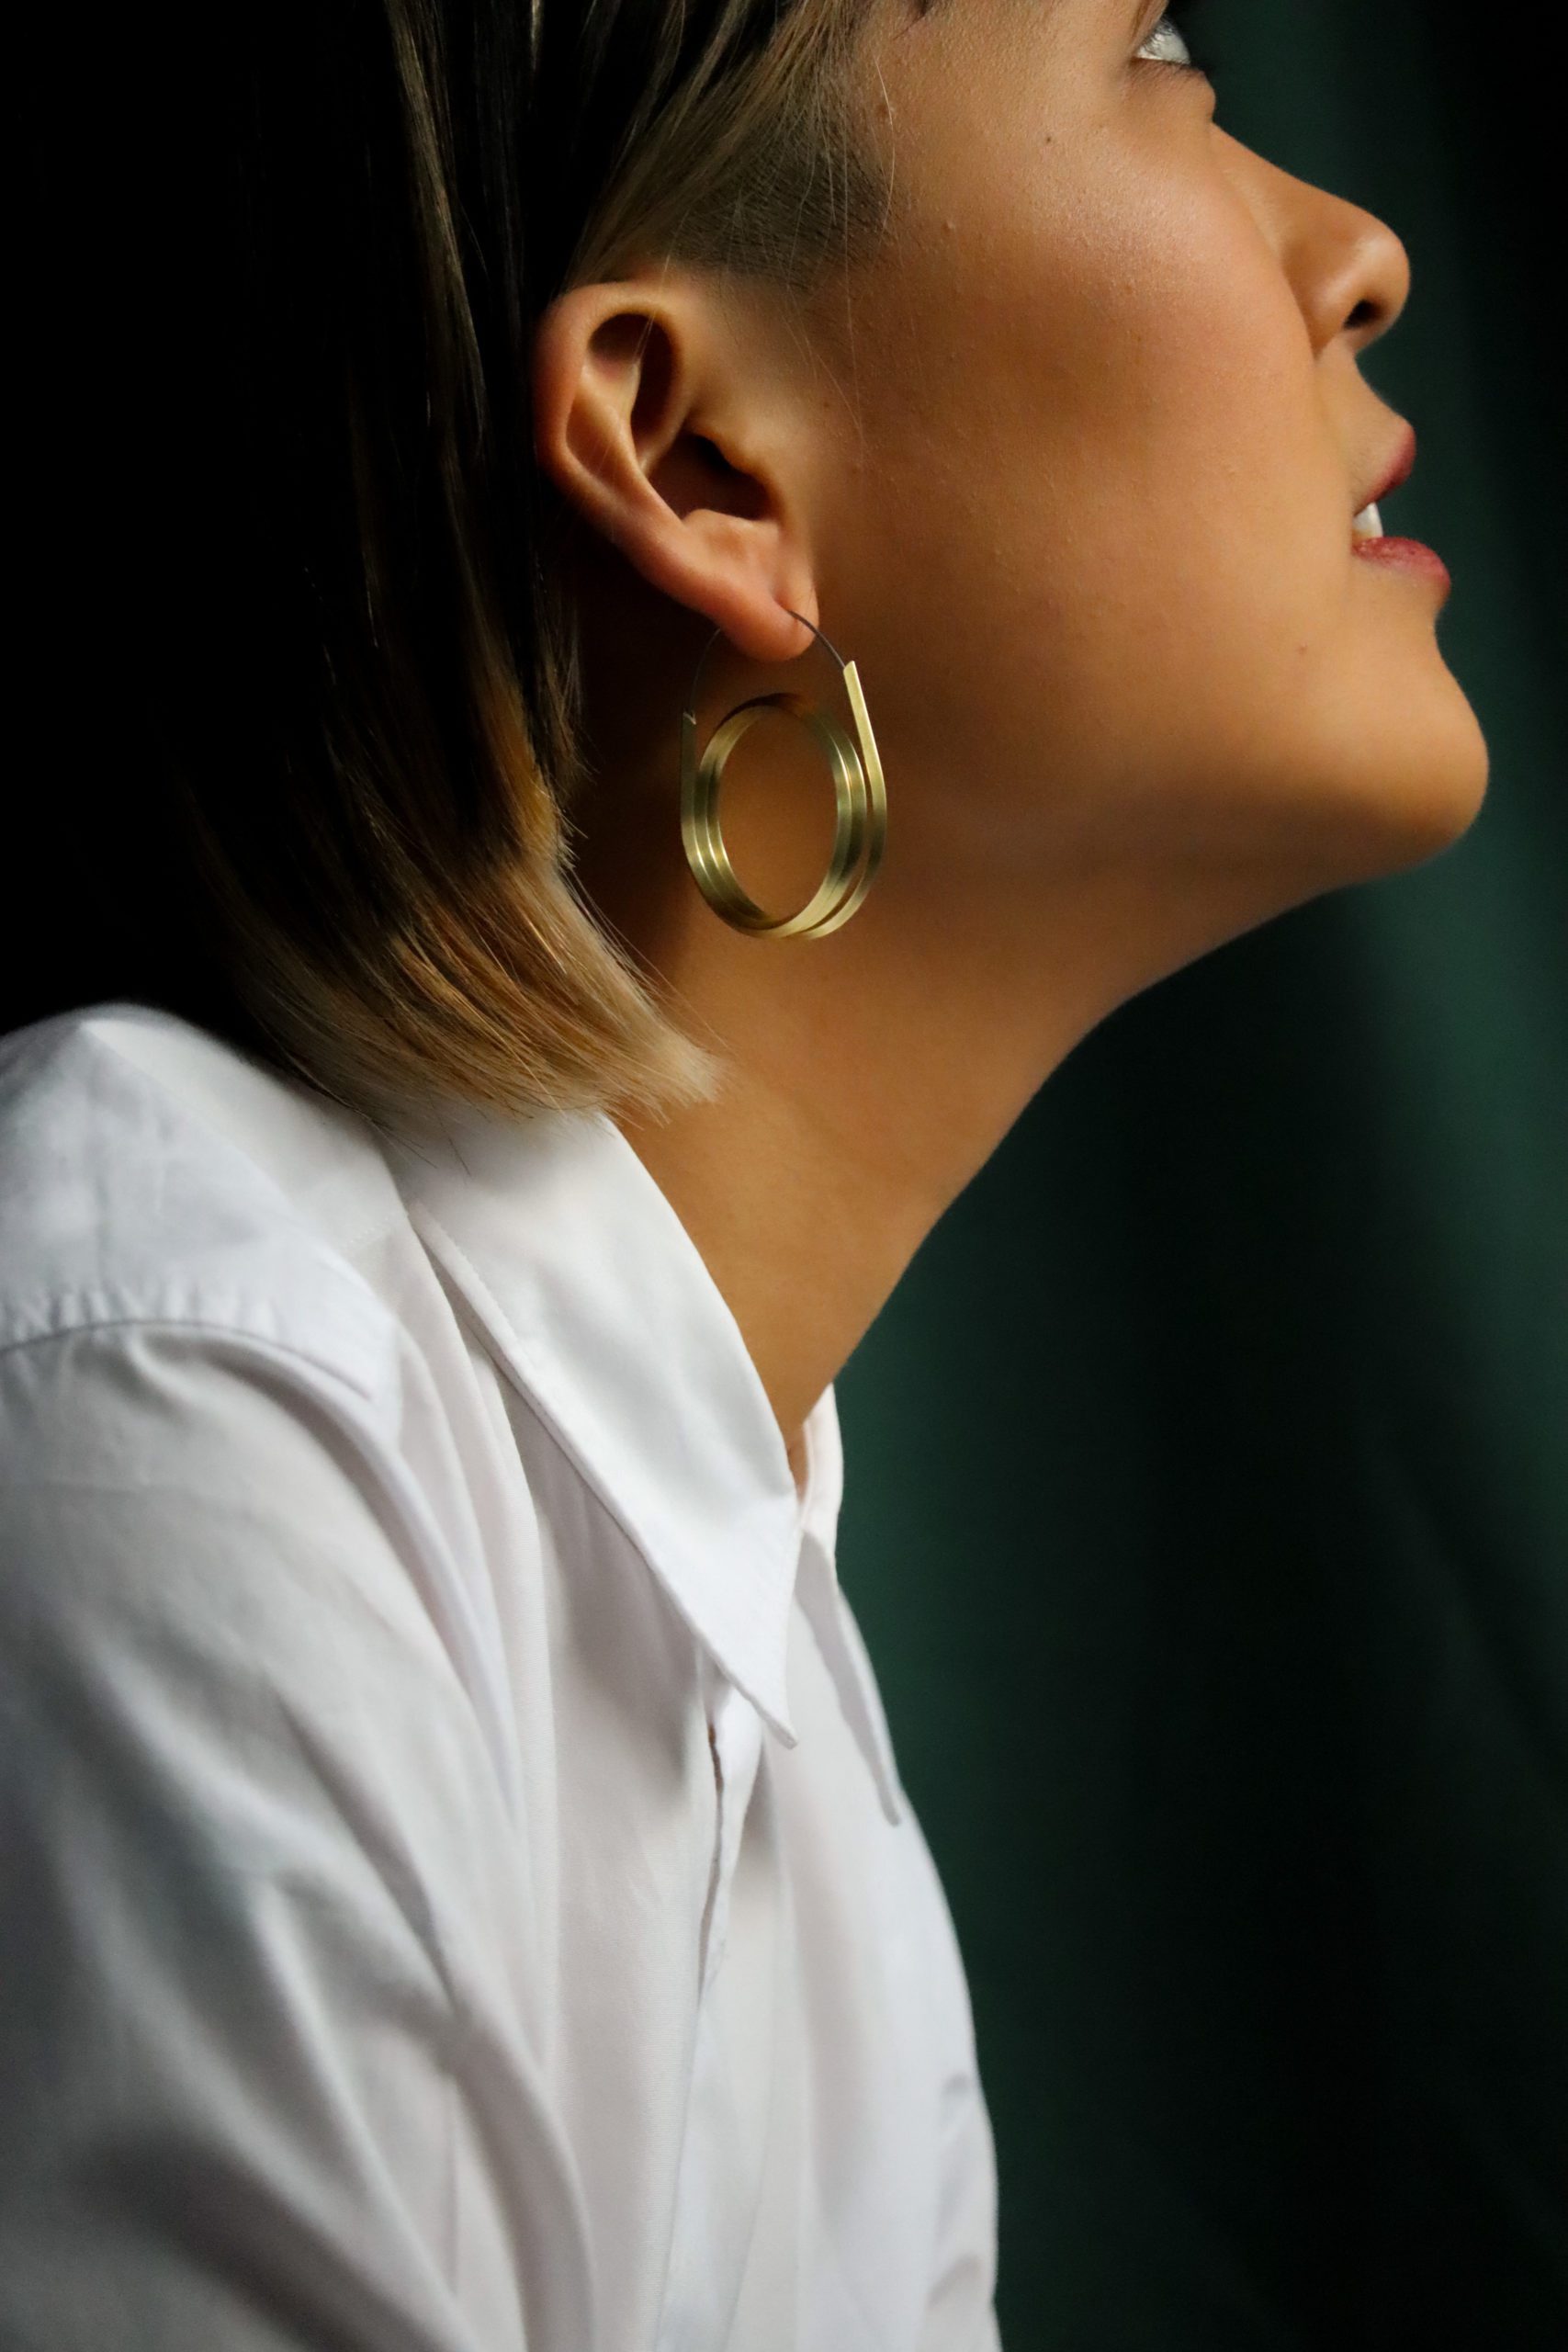 Photo of a side on view of a young woman from the shoulders up wearing a white collared shirt, double brass hoops, looking up, on a green background